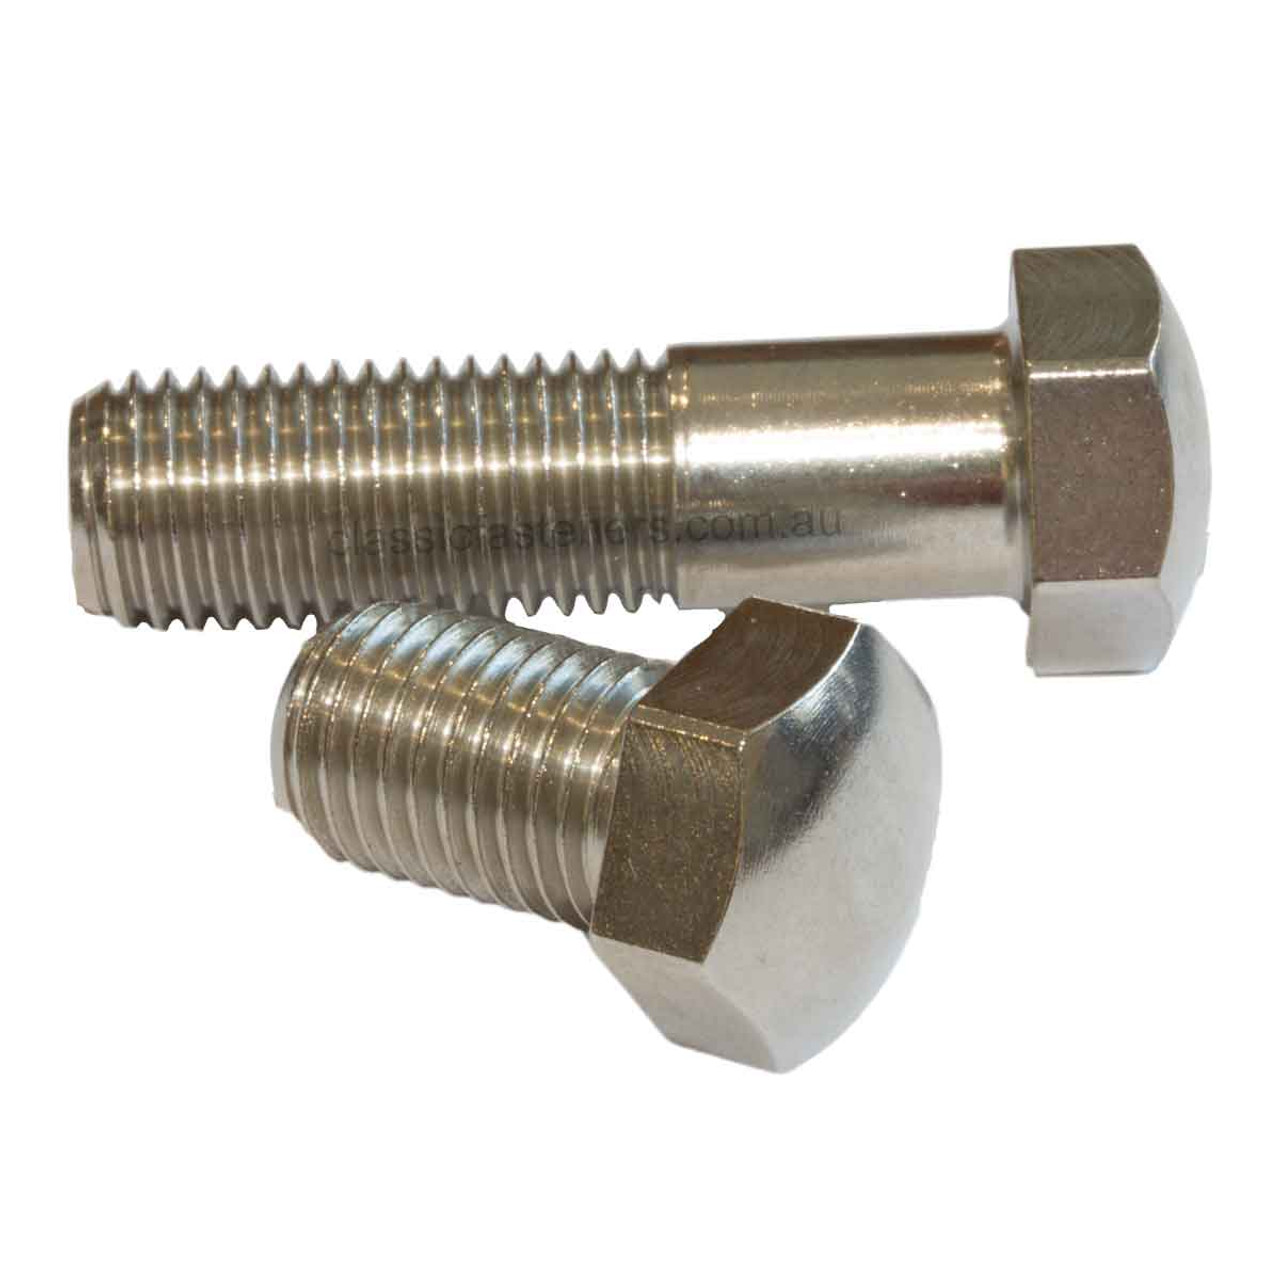 M10 (1.25) FINE x 35mm Domed Bolt 14mm AF Stainless 304 Classic Fasteners